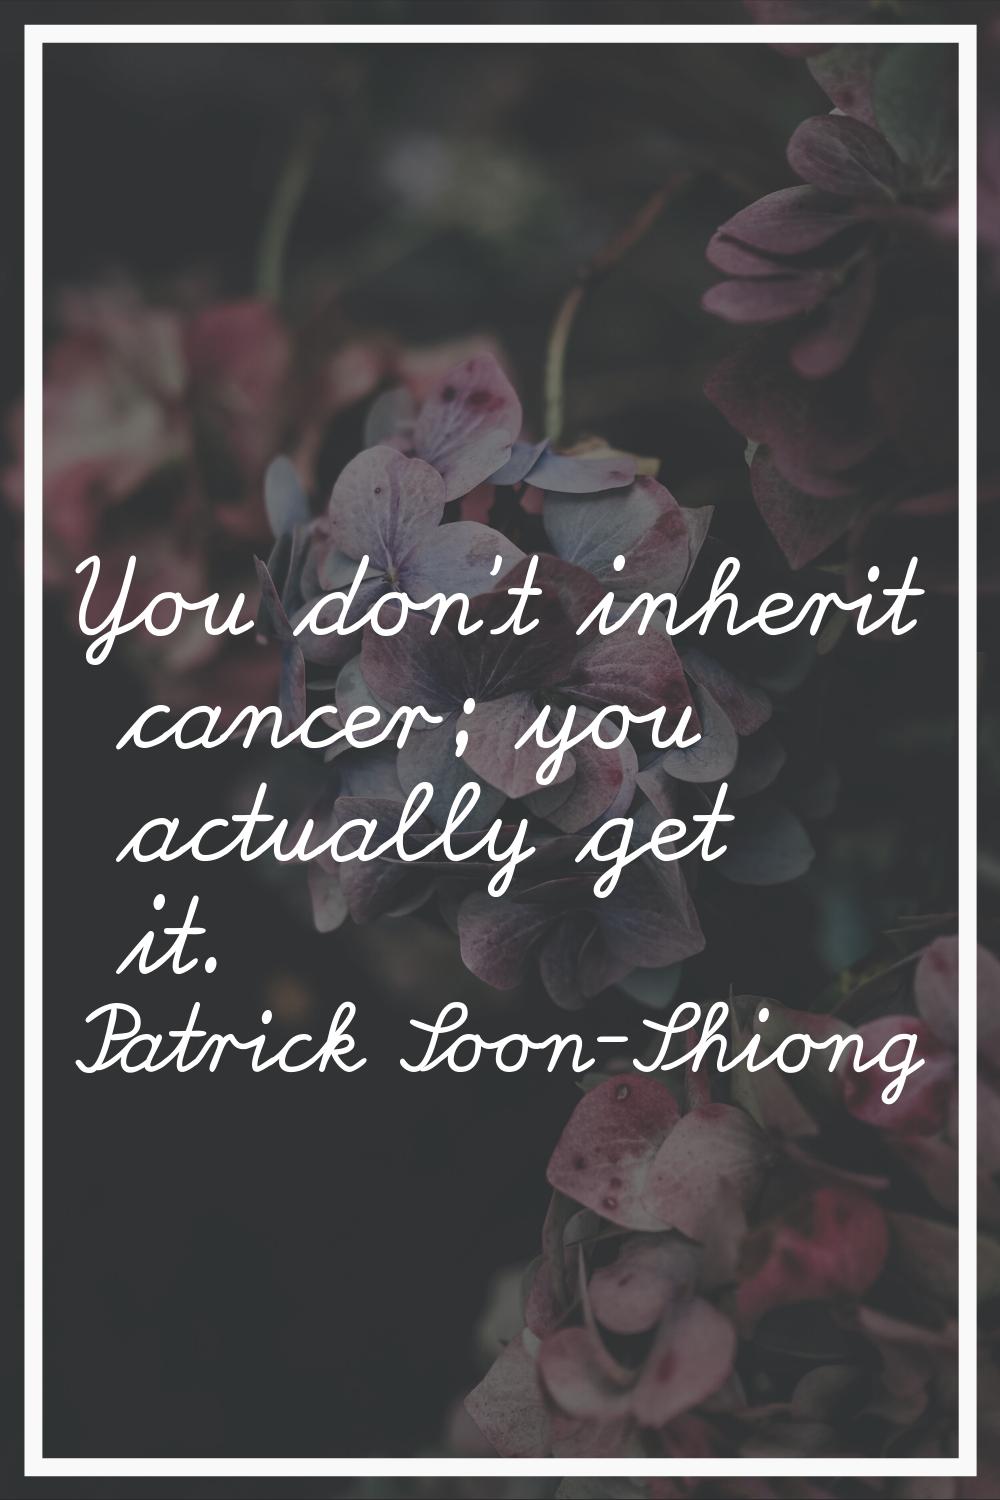 You don't inherit cancer; you actually get it.